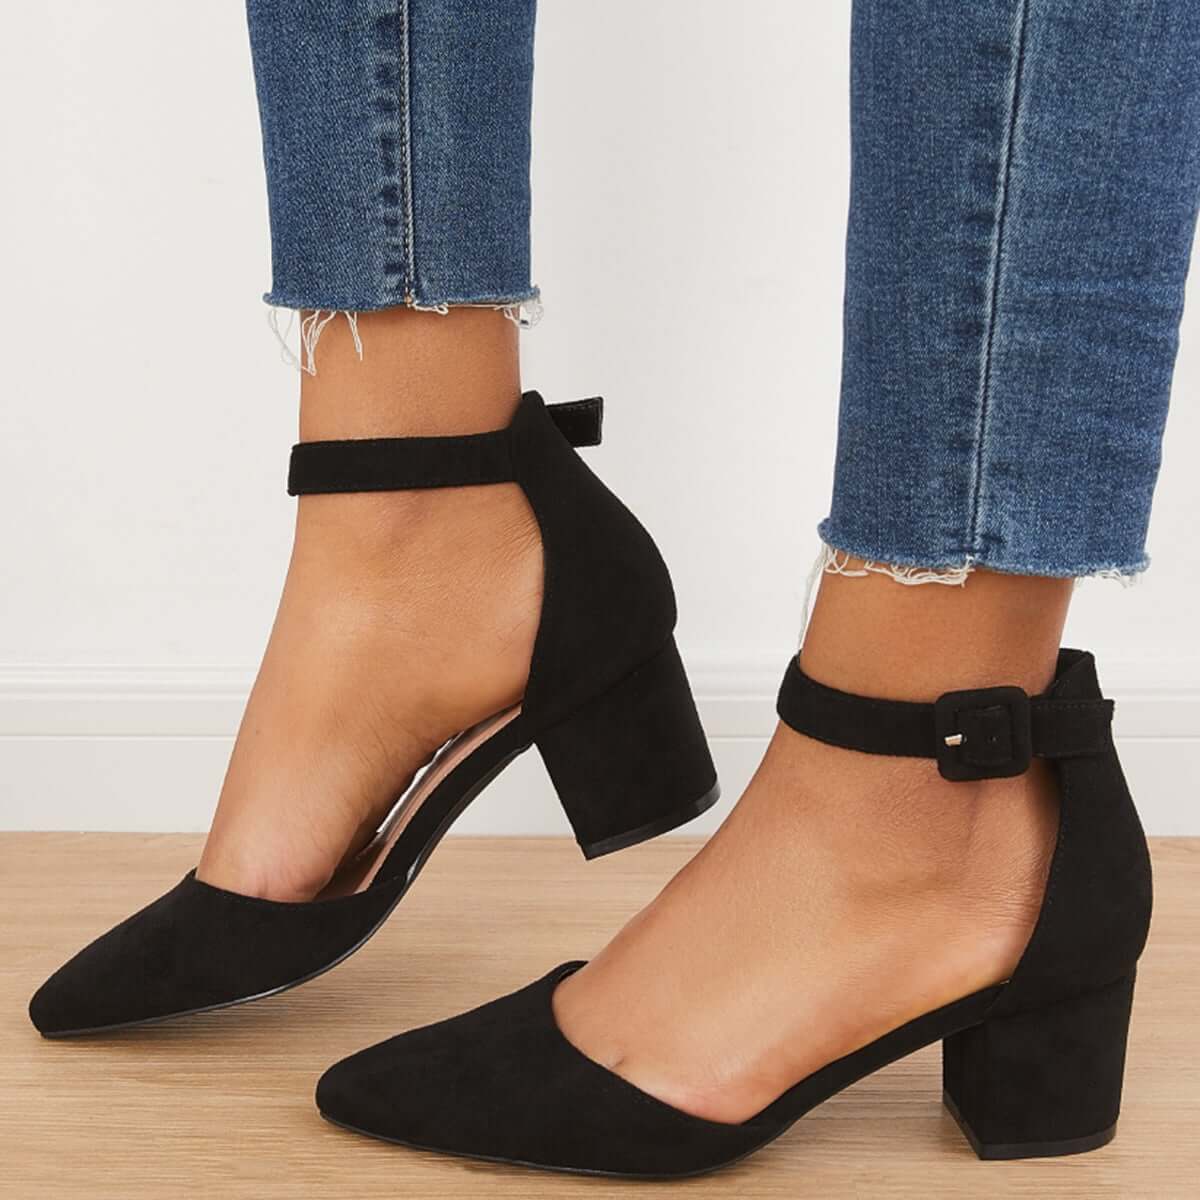 Petite Black Suede Ankle Strap Mid Heel - by Pretty Small Shoes